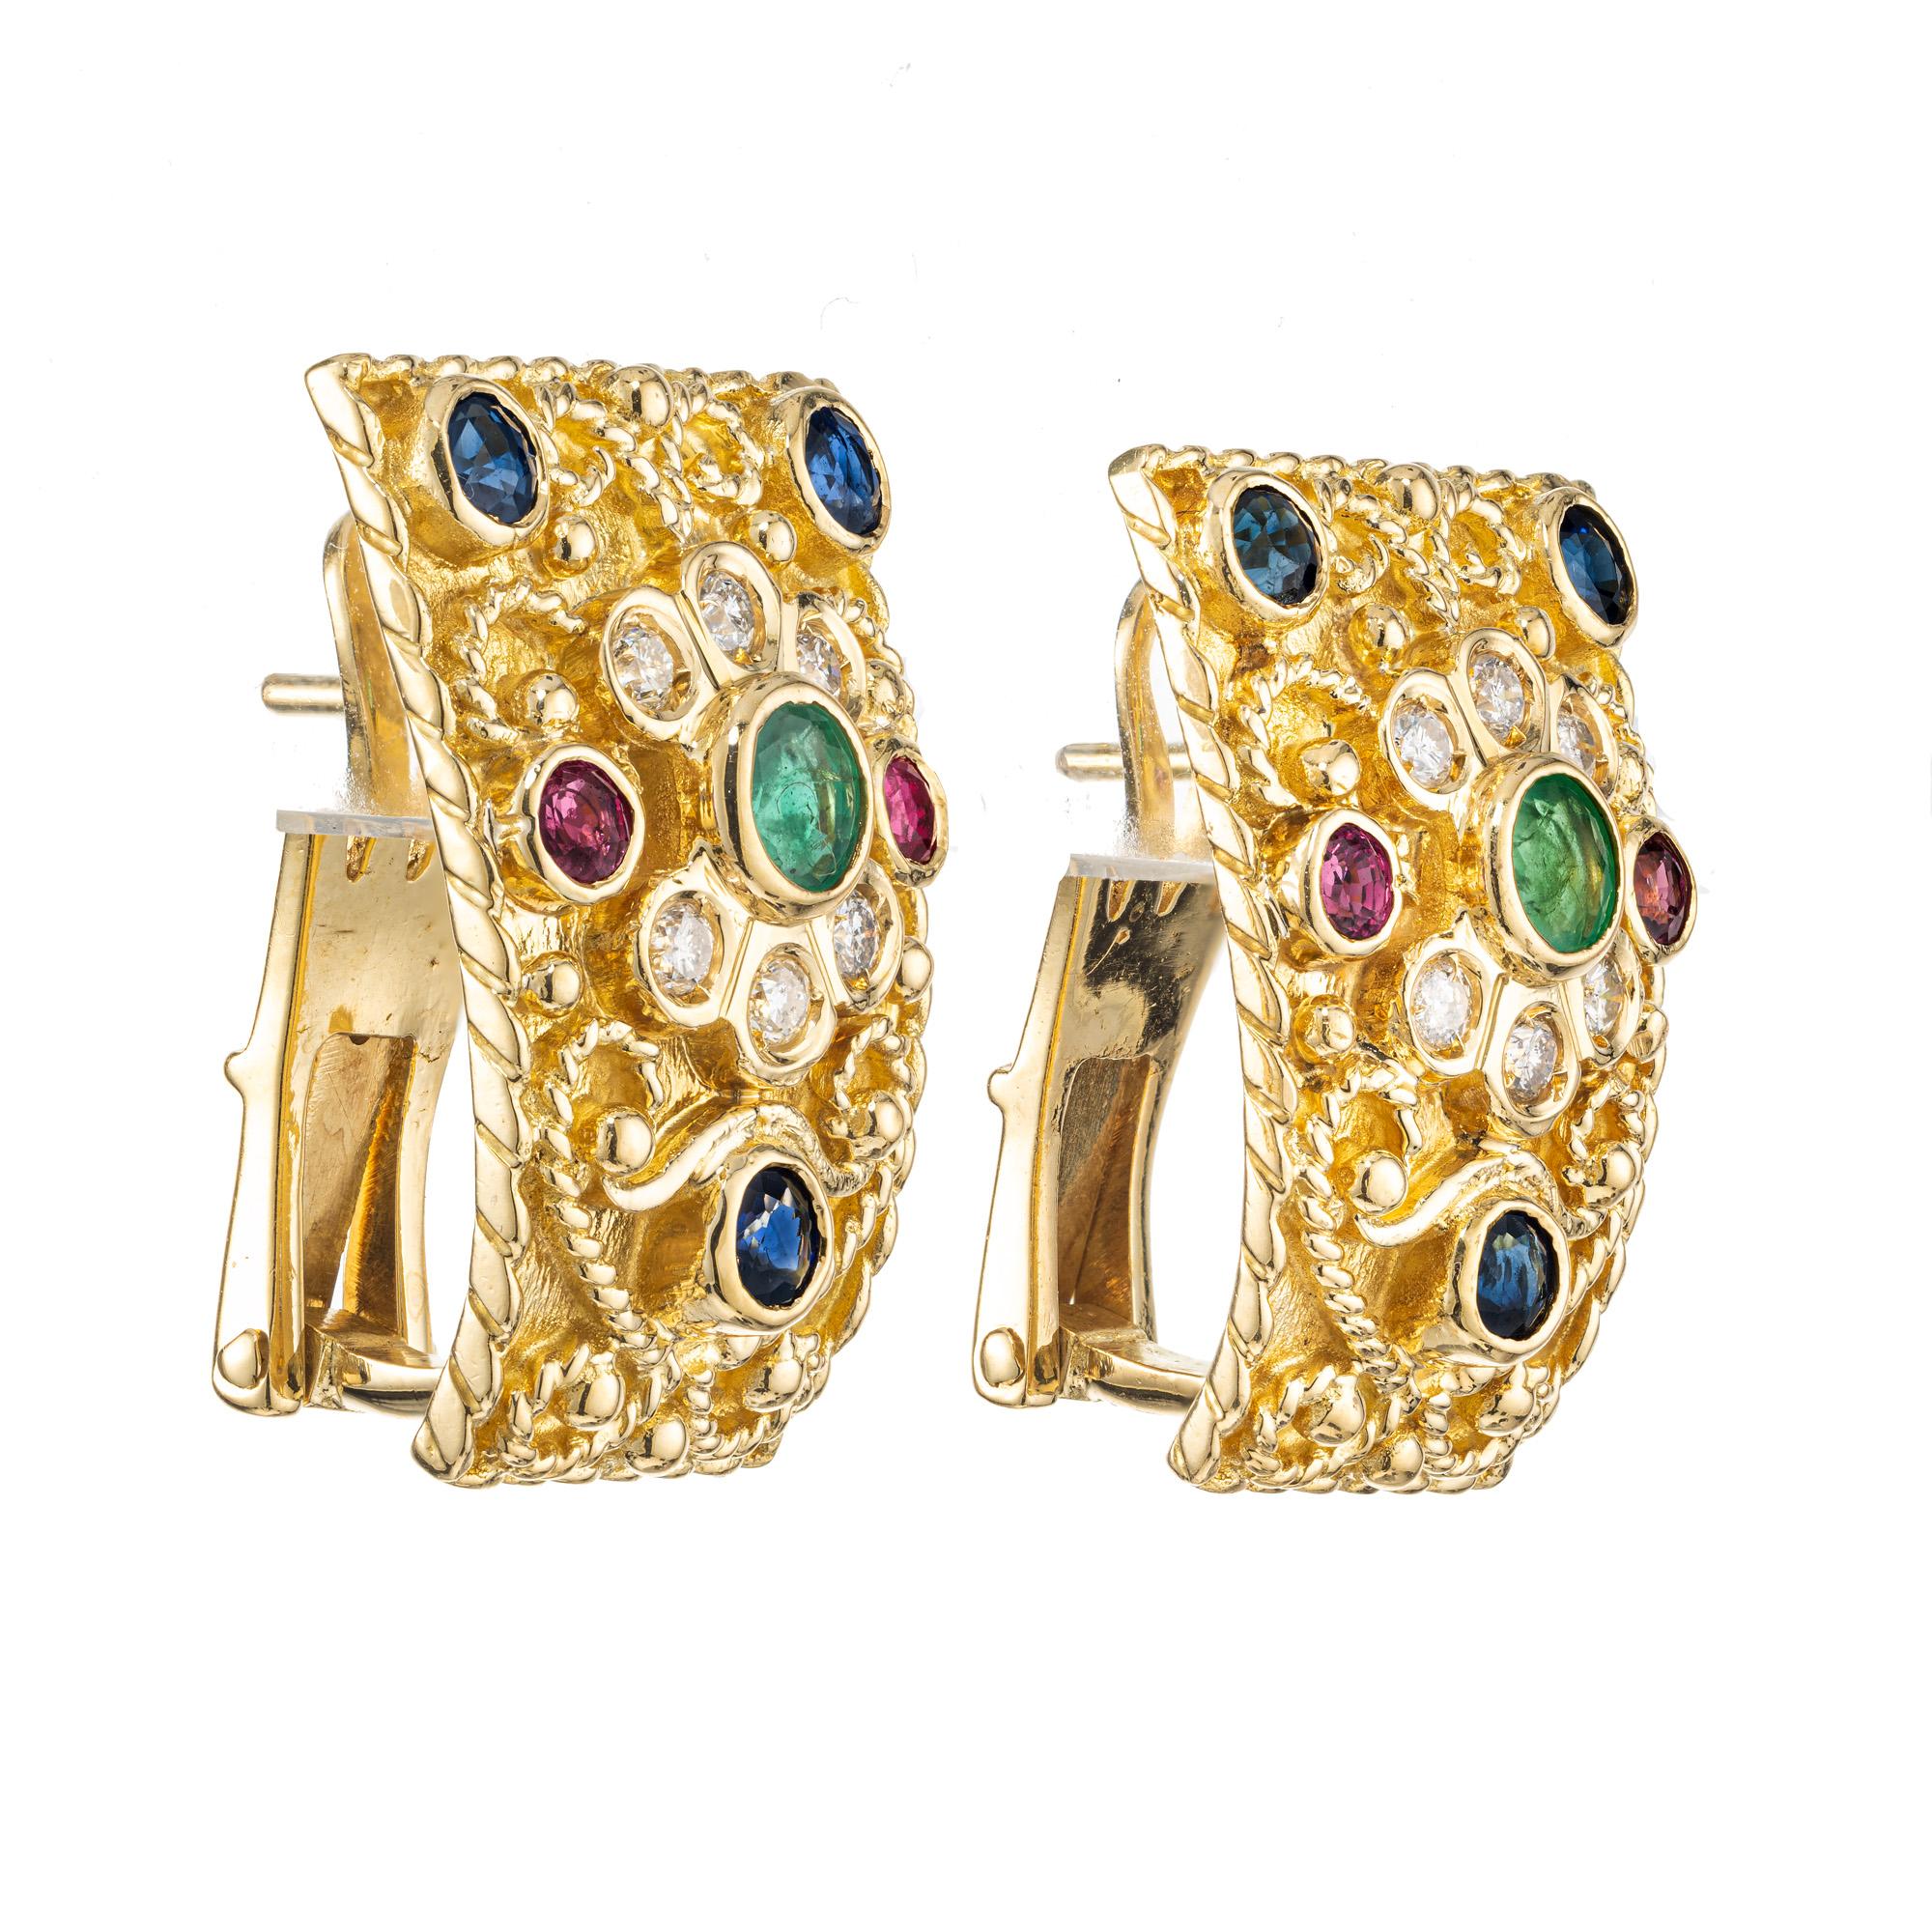 Byzantine style multi stone gemstone earrings. Handmade beautifully textured and highly detailed, these 18k yellow gold clip post earrings are adorned with two round emeralds, 6 round sapphires, 4 round rubies, 2 round emeralds and 12 round